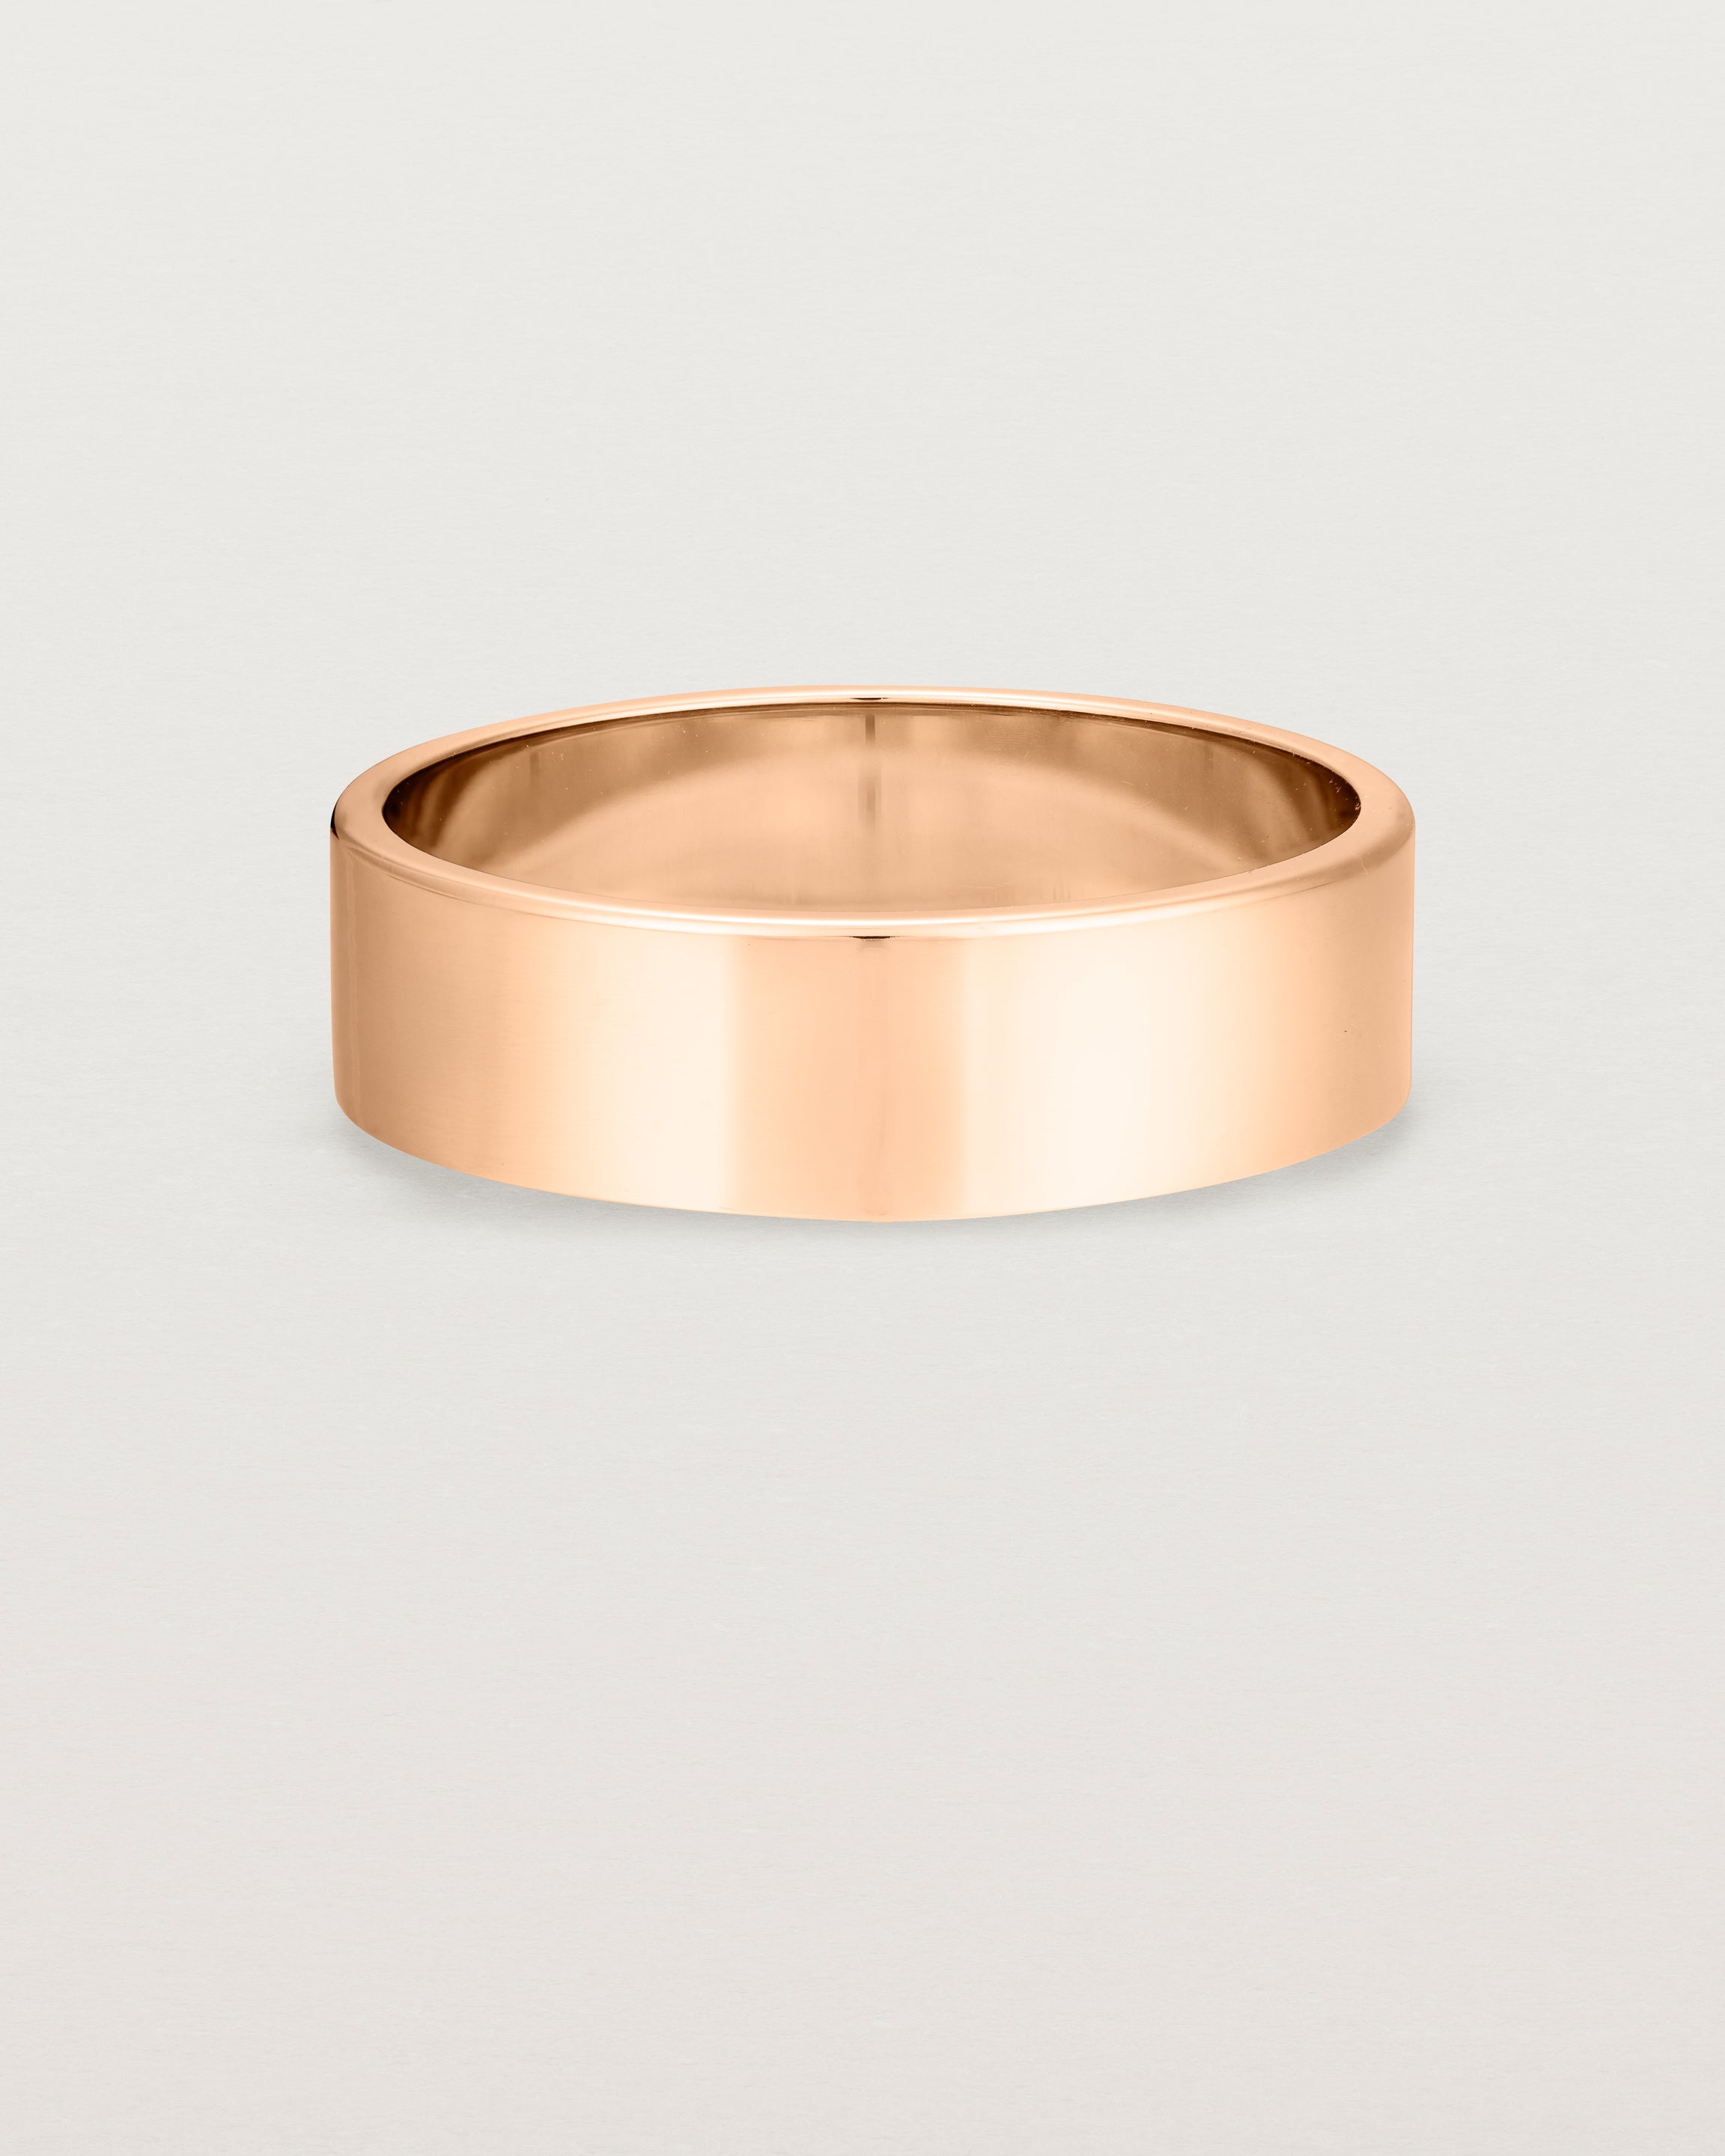 Our square profile, 6mm flat wedding band crafted in rose gold